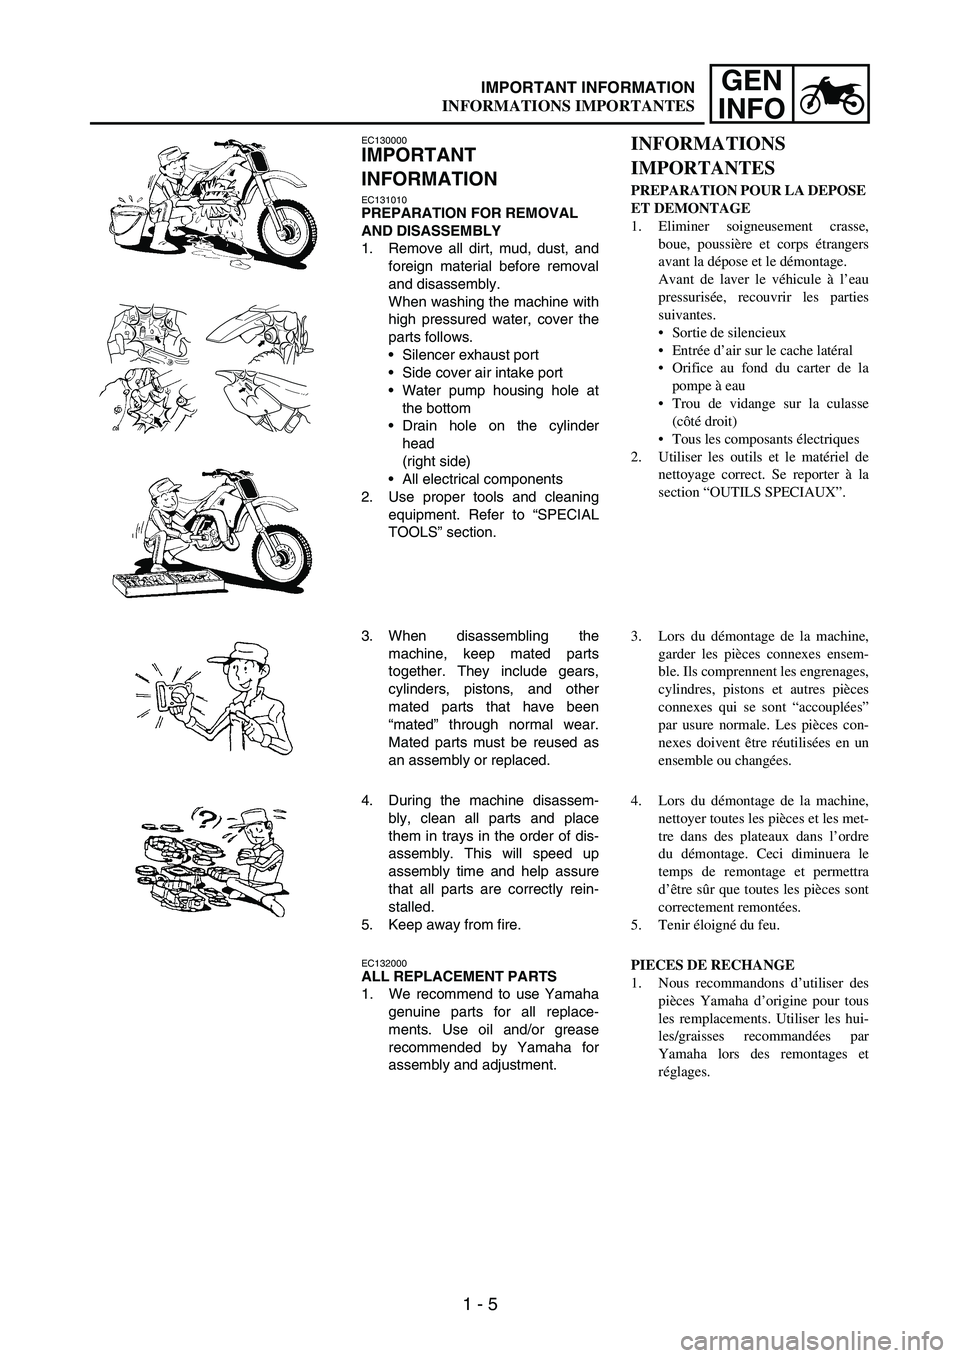 YAMAHA WR 250F 2004  Notices Demploi (in French) 1 - 5
GEN
INFOIMPORTANT INFORMATION
EC130000
IMPORTANT 
INFORMATION
EC131010PREPARATION FOR REMOVAL 
AND DISASSEMBLY
1. Remove all dirt, mud, dust, and
foreign material before removal
and disassembly.